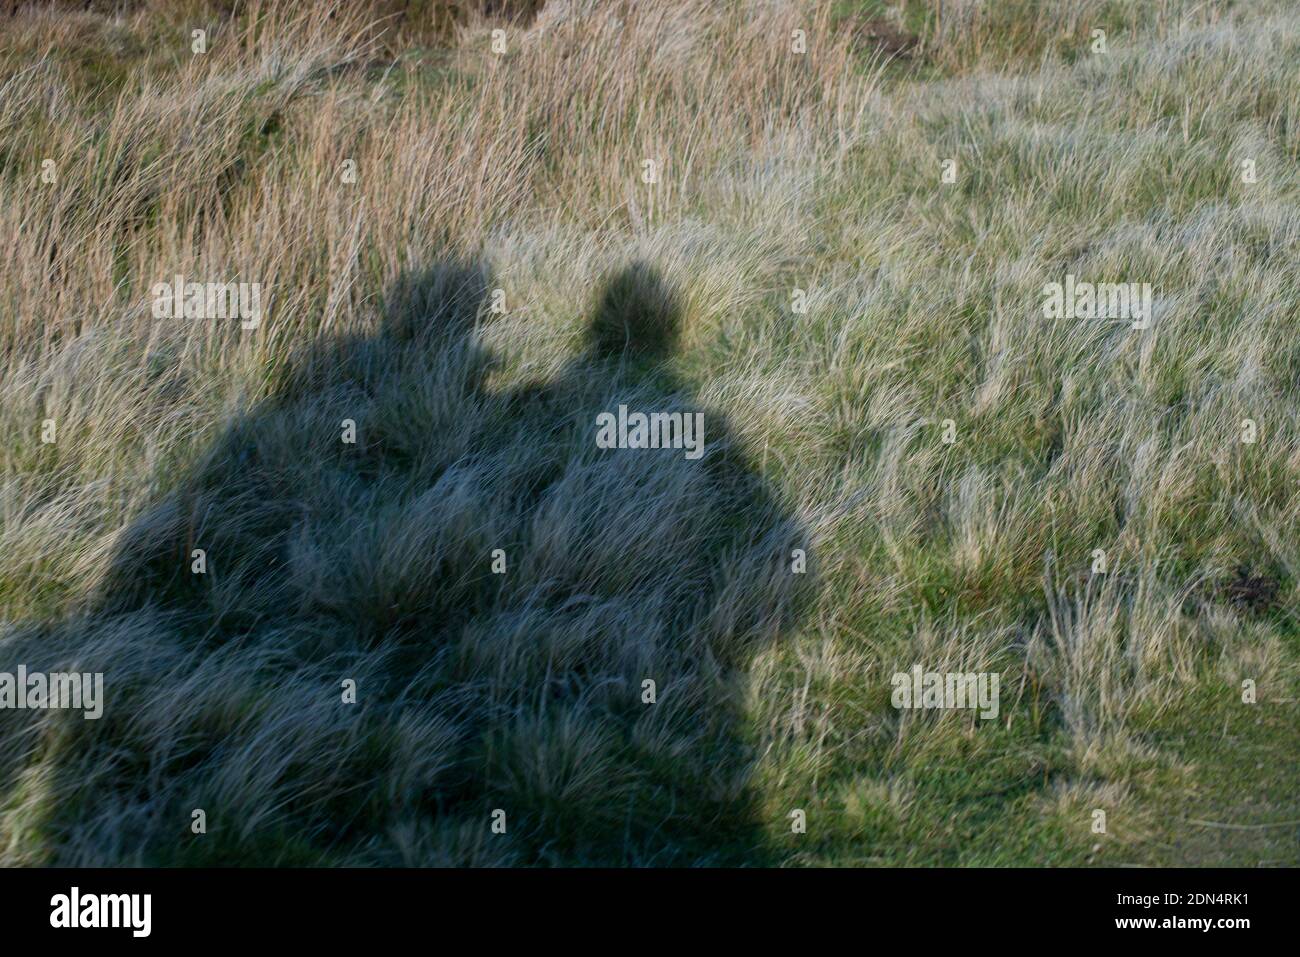 A simple image of the shadows of two people standing close together on open grassland Stock Photo